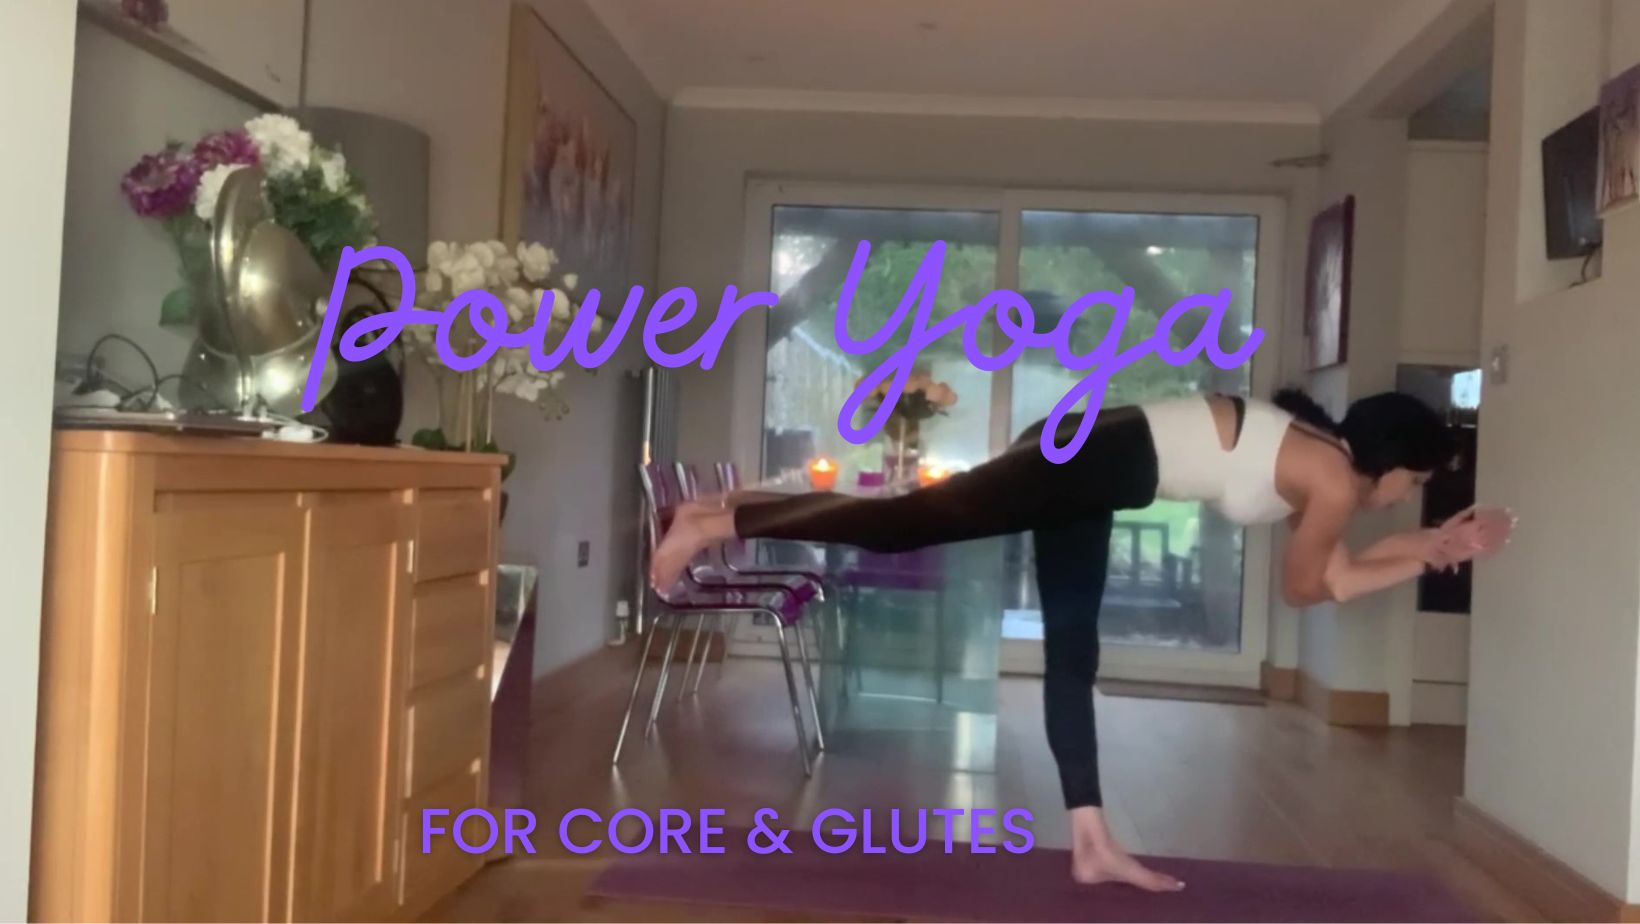 A power yoga sequence for the core and glutes